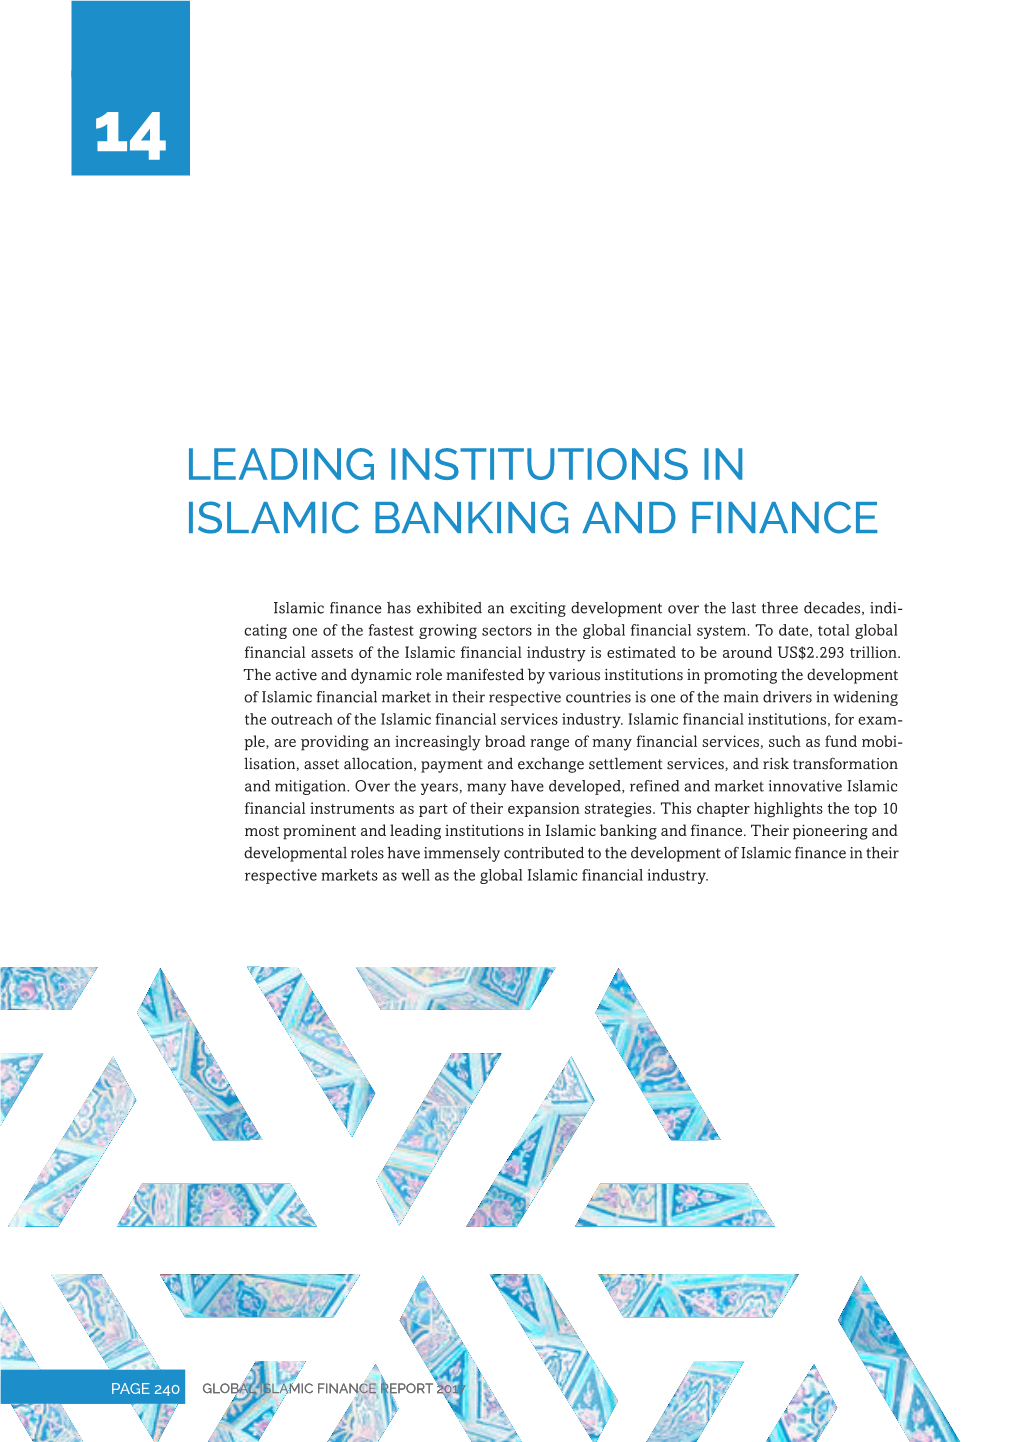 Leading Institutions in Islamic Banking and Finance